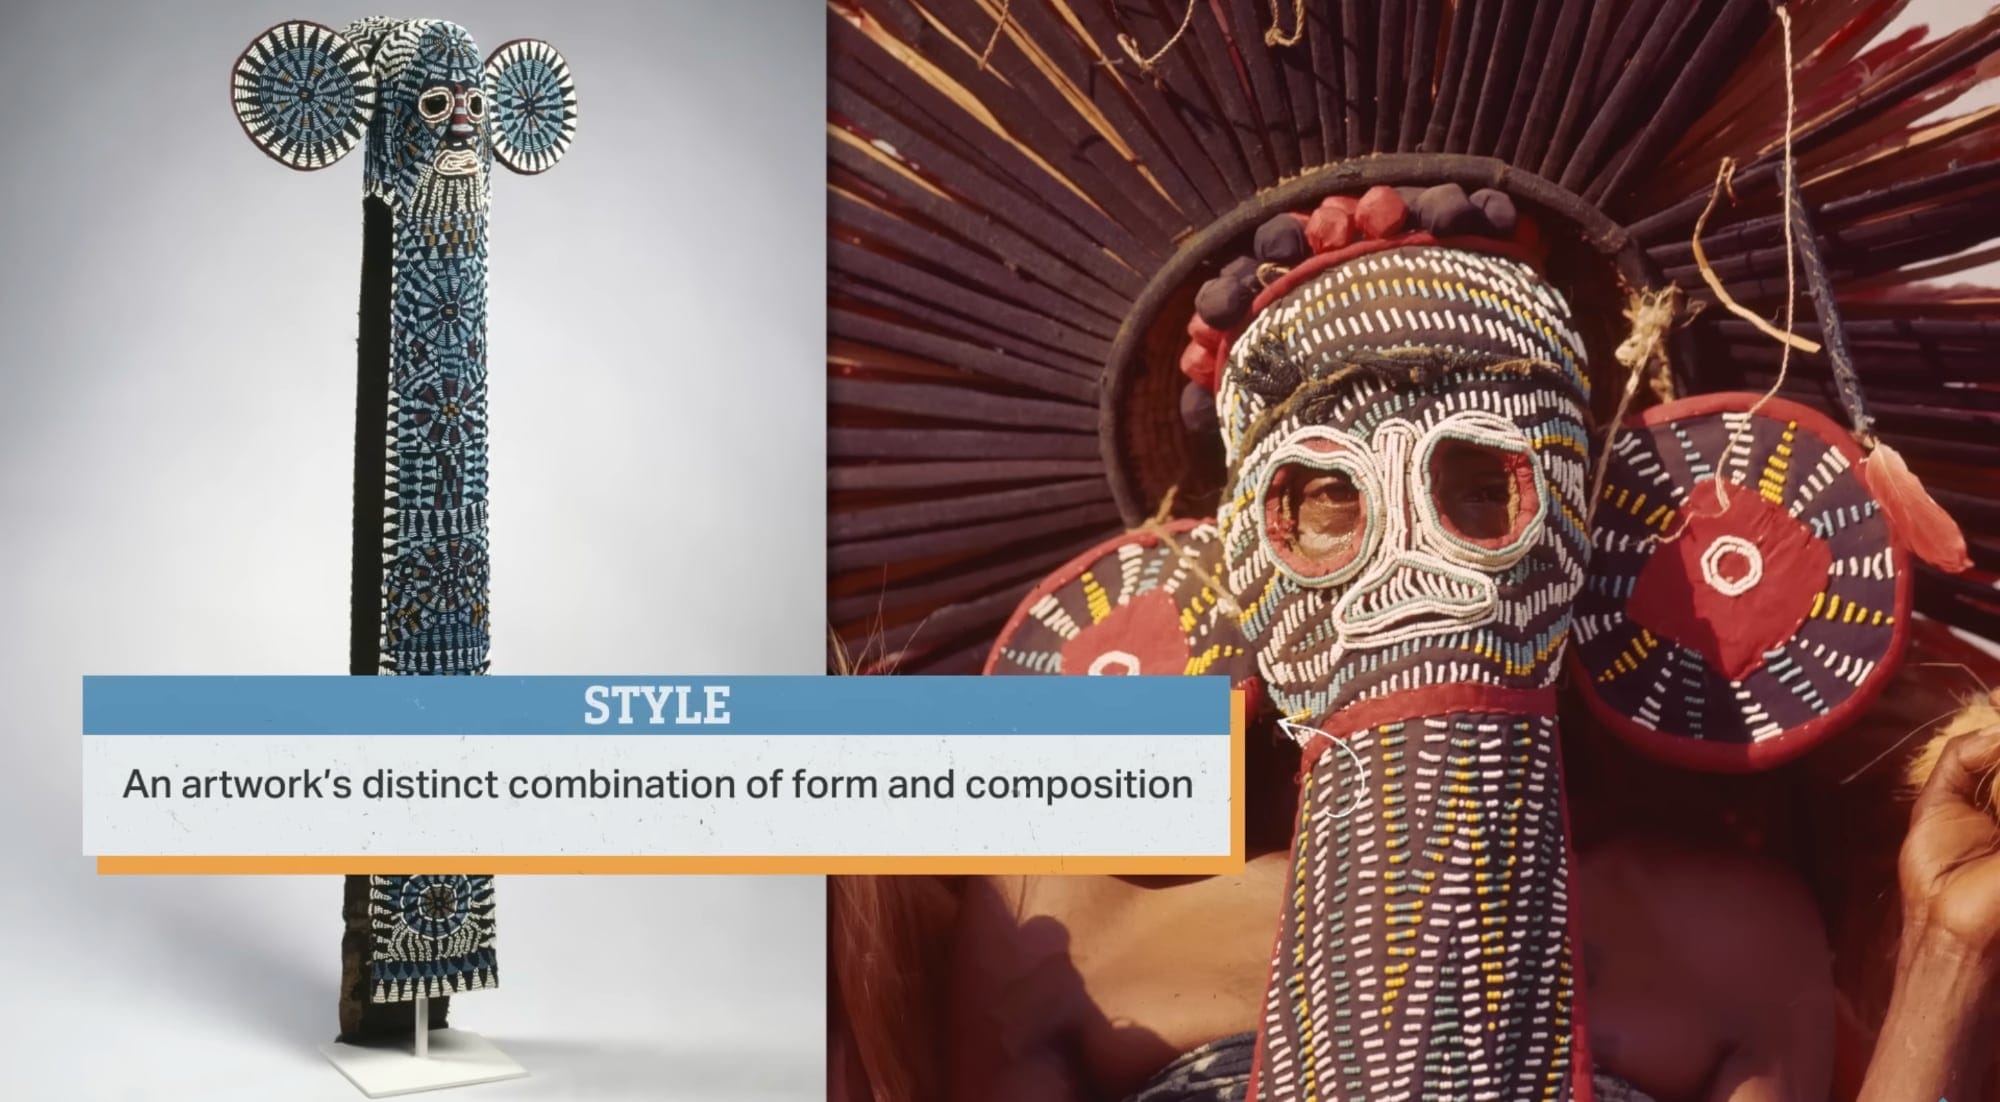 a video still with two images of elaborately beaded masks and text that says style: an artwork's distinct combination of form and composition